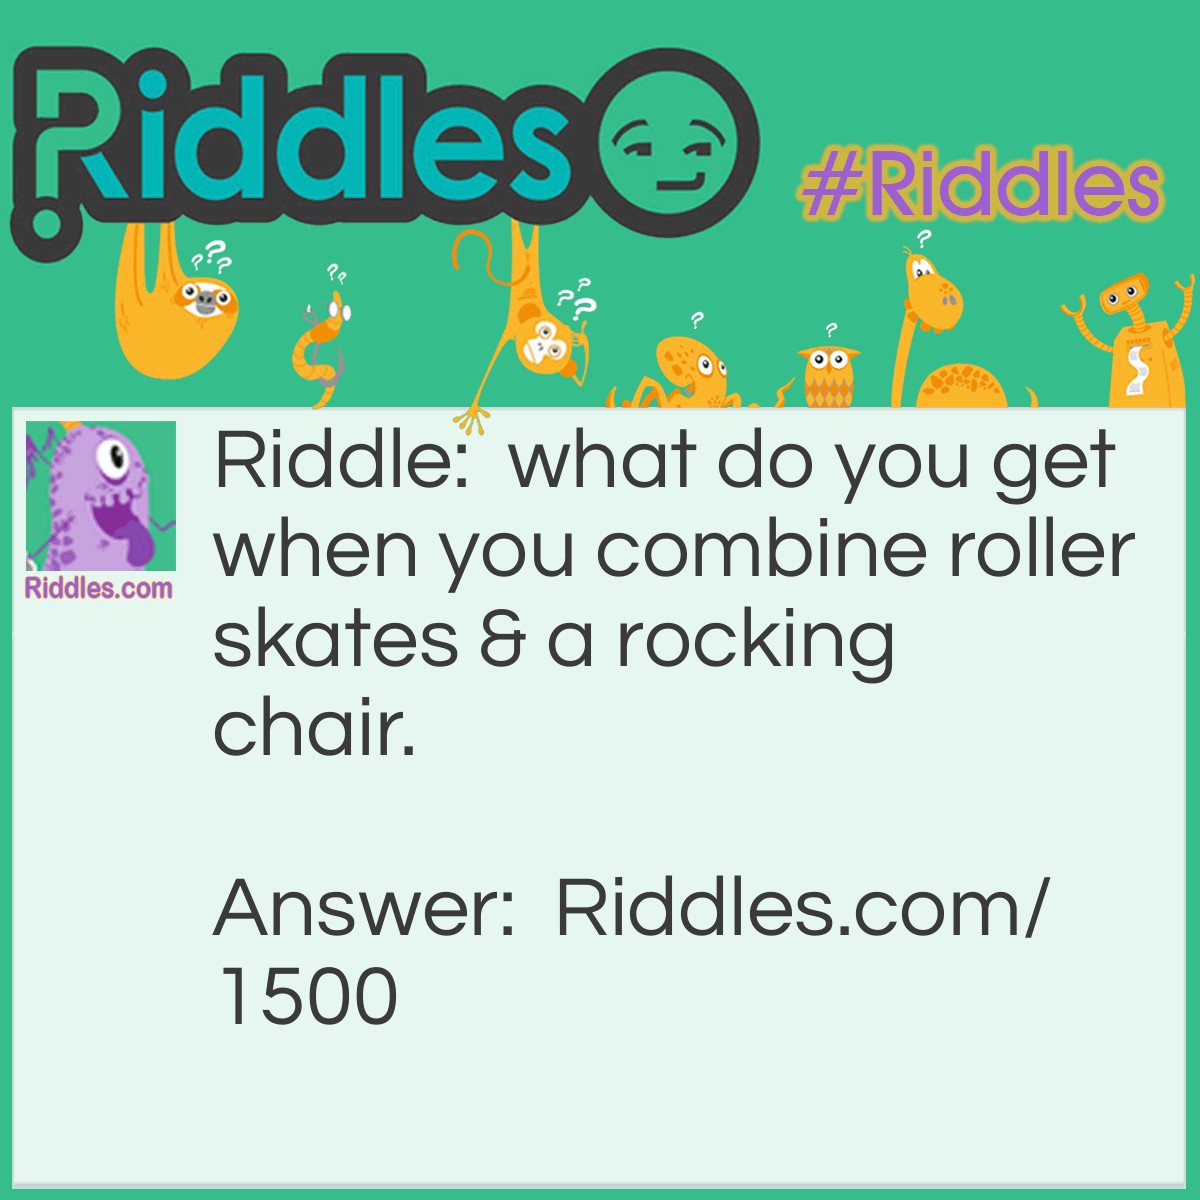 Riddle: What do you get when you combine roller skates & a rocking chair? Answer: Rock-N-roll.